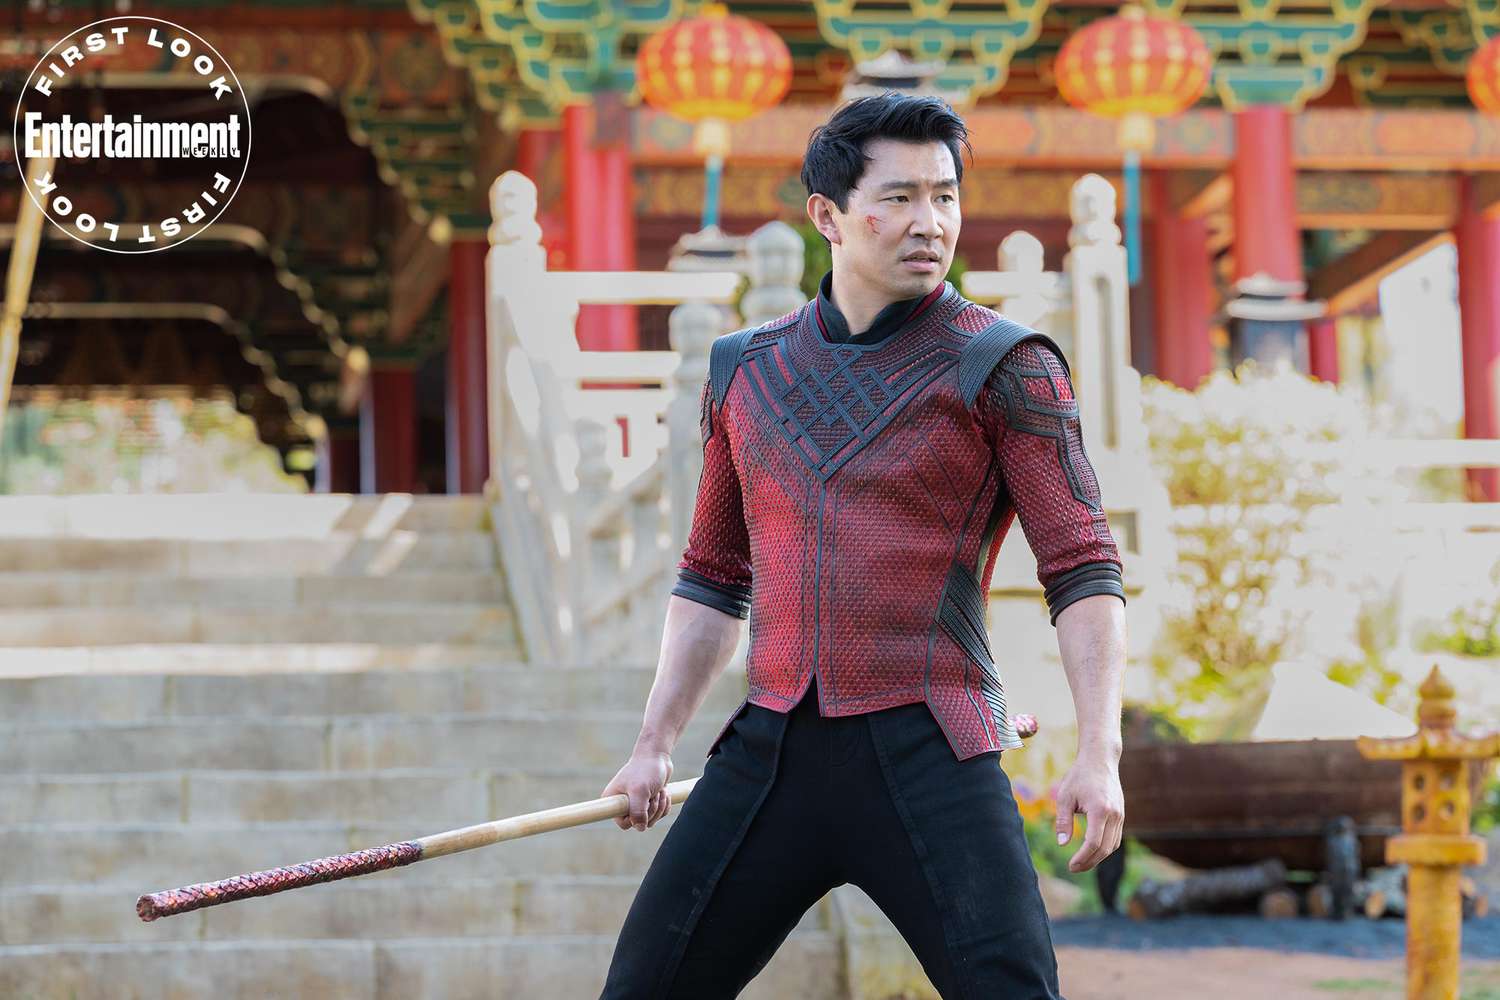 First look at Simu Liu in Shang-Chi and the Legend of the Ten Rings